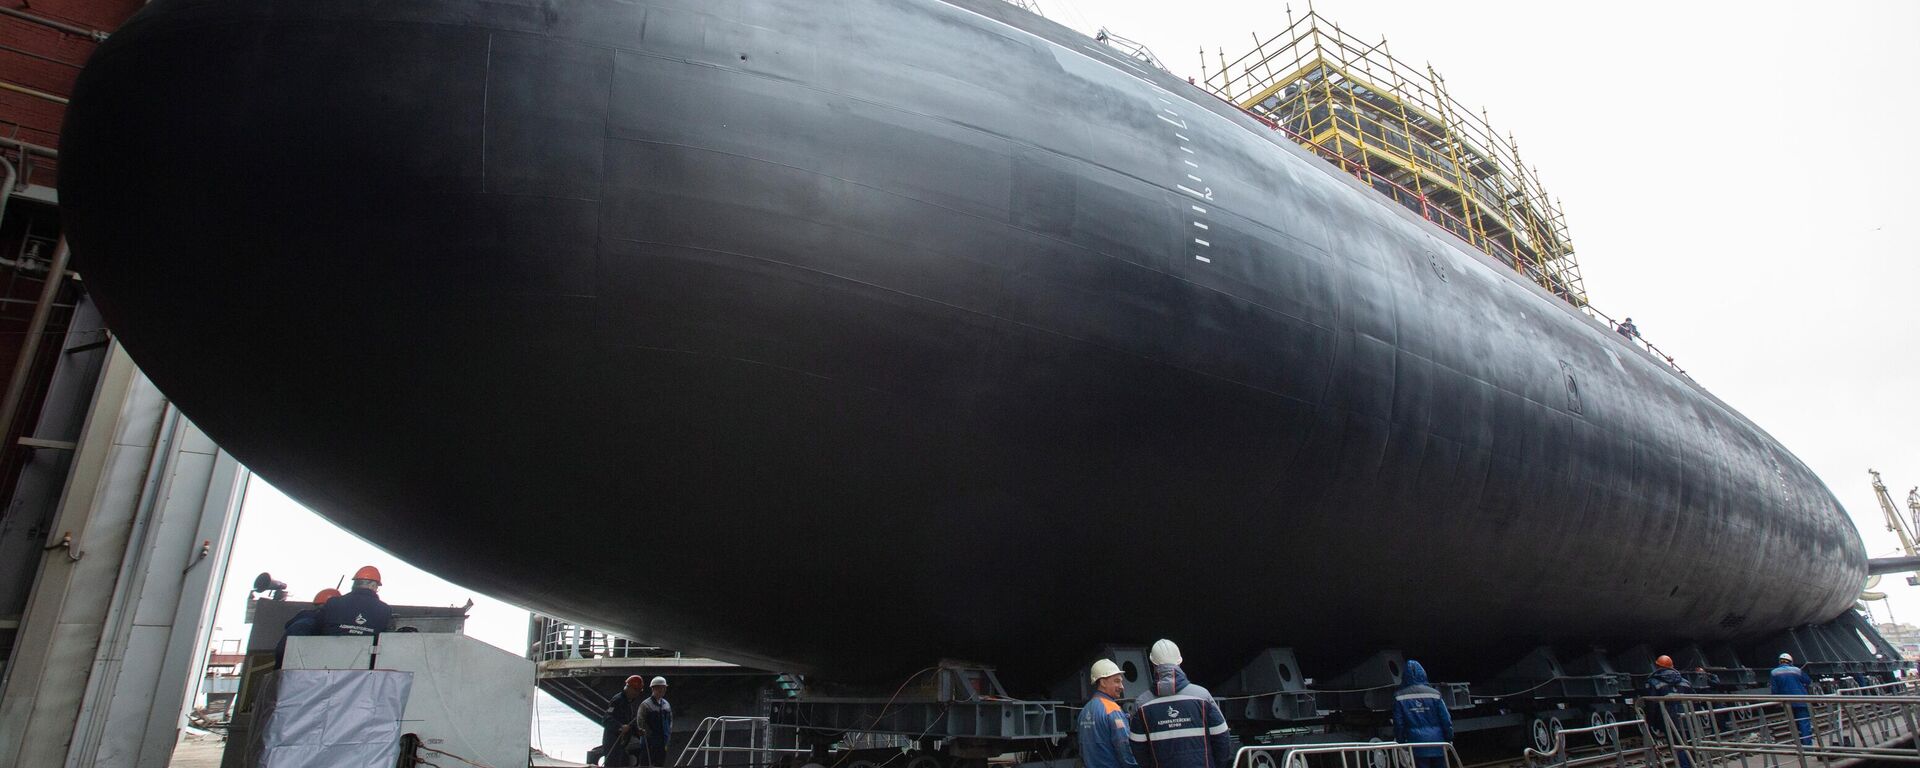 Workers prepare to launch the Mozhaisk, the latest Project 636.3 submarine built for Russia's Pacific Fleet. - Sputnik International, 1920, 28.04.2023